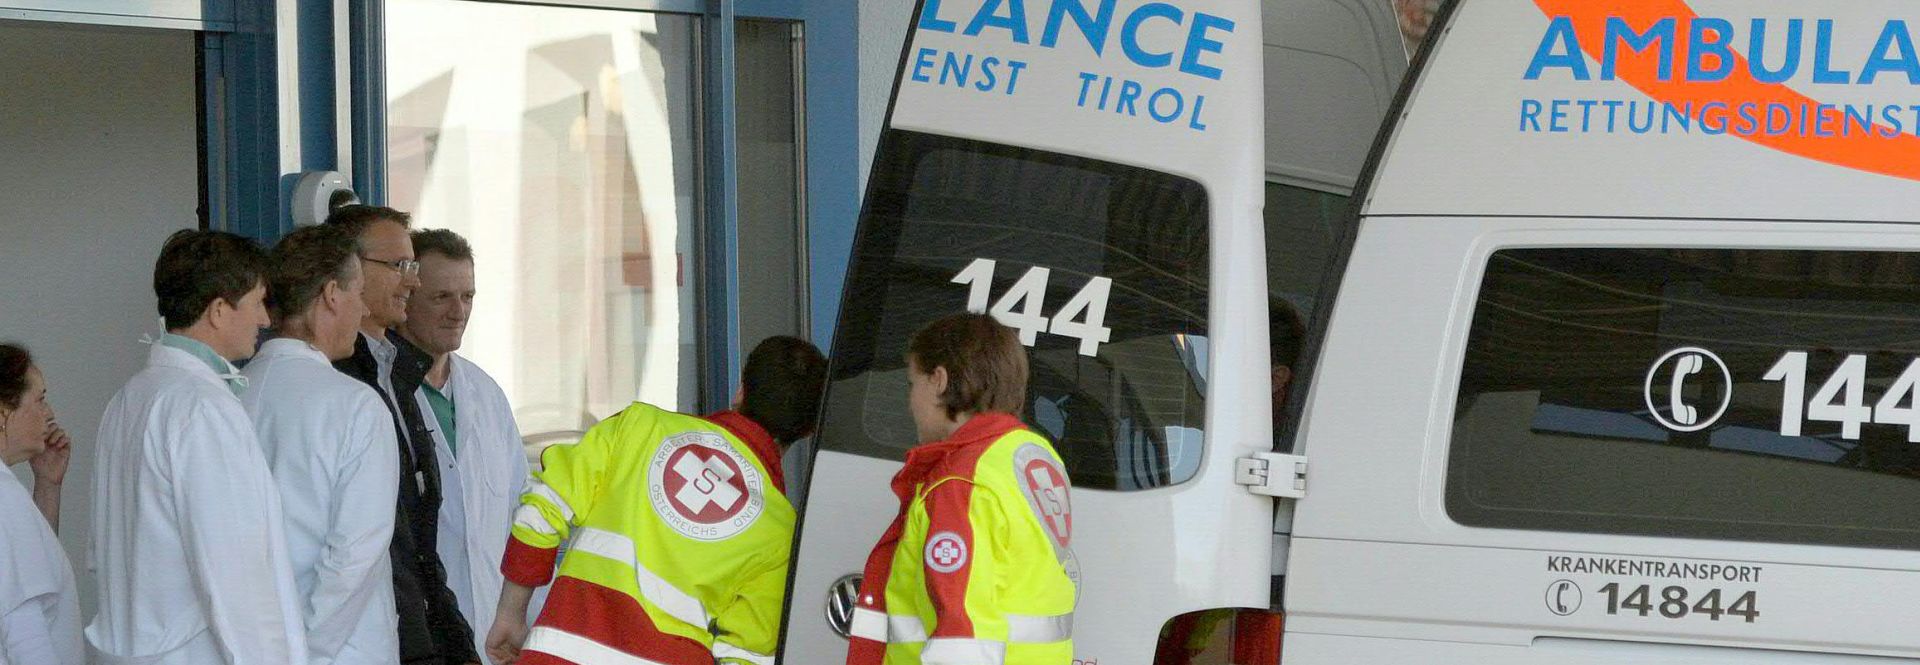 epa04986734 Emergency staff arounf the dorrs of an ambulance as Austrian ski racer Anna Fenninger is brought to hospital in the private clinic in Hochrum, near Innsbruck, Tyrol, Austria, 21 October 2015 after being airlifted by hellicopter following a severe crash during training in Soelden, Tyrol earlier in the day. After the diagnosis of torn ligaments in her right knee she won't be able to compete in the Alpine Ski World Cup 2015/16.  EPA/ZEITUNGSFOTO.AT